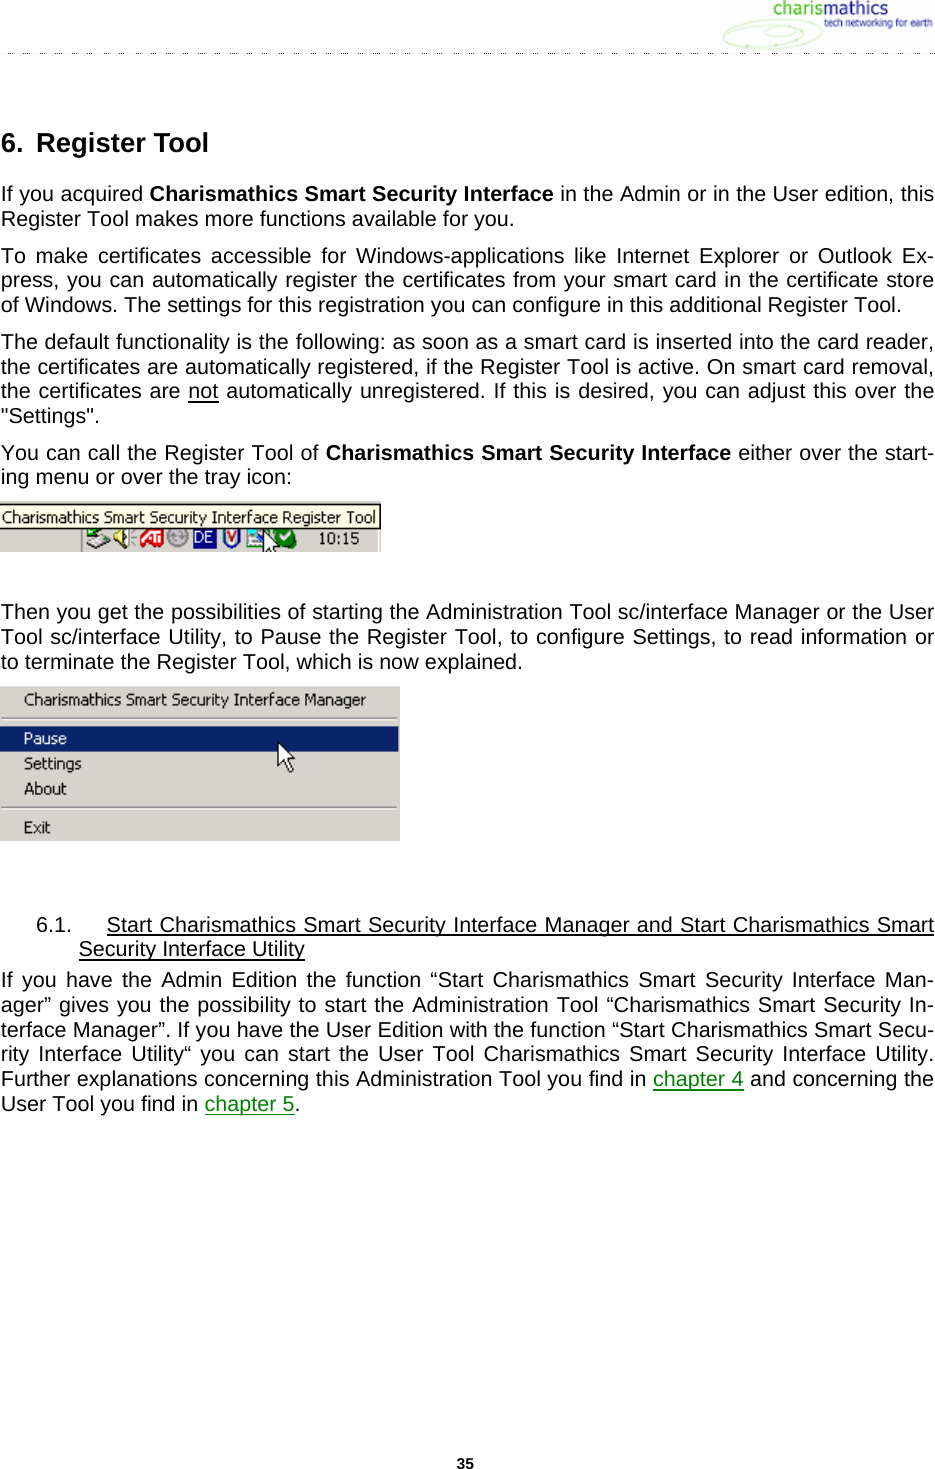     356. Register Tool If you acquired Charismathics Smart Security Interface in the Admin or in the User edition, this Register Tool makes more functions available for you.  To make certificates accessible for Windows-applications like Internet Explorer or Outlook Ex-press, you can automatically register the certificates from your smart card in the certificate store of Windows. The settings for this registration you can configure in this additional Register Tool.  The default functionality is the following: as soon as a smart card is inserted into the card reader, the certificates are automatically registered, if the Register Tool is active. On smart card removal, the certificates are not automatically unregistered. If this is desired, you can adjust this over the &quot;Settings&quot;.  You can call the Register Tool of Charismathics Smart Security Interface either over the start-ing menu or over the tray icon:   Then you get the possibilities of starting the Administration Tool sc/interface Manager or the User Tool sc/interface Utility, to Pause the Register Tool, to configure Settings, to read information or to terminate the Register Tool, which is now explained.   6.1.  Start Charismathics Smart Security Interface Manager and Start Charismathics Smart Security Interface Utility If you have the Admin Edition the function “Start Charismathics Smart Security Interface Man-ager” gives you the possibility to start the Administration Tool “Charismathics Smart Security In-terface Manager”. If you have the User Edition with the function “Start Charismathics Smart Secu-rity Interface Utility“ you can start the User Tool Charismathics Smart Security Interface Utility. Further explanations concerning this Administration Tool you find in chapter 4 and concerning the User Tool you find in chapter 5.  